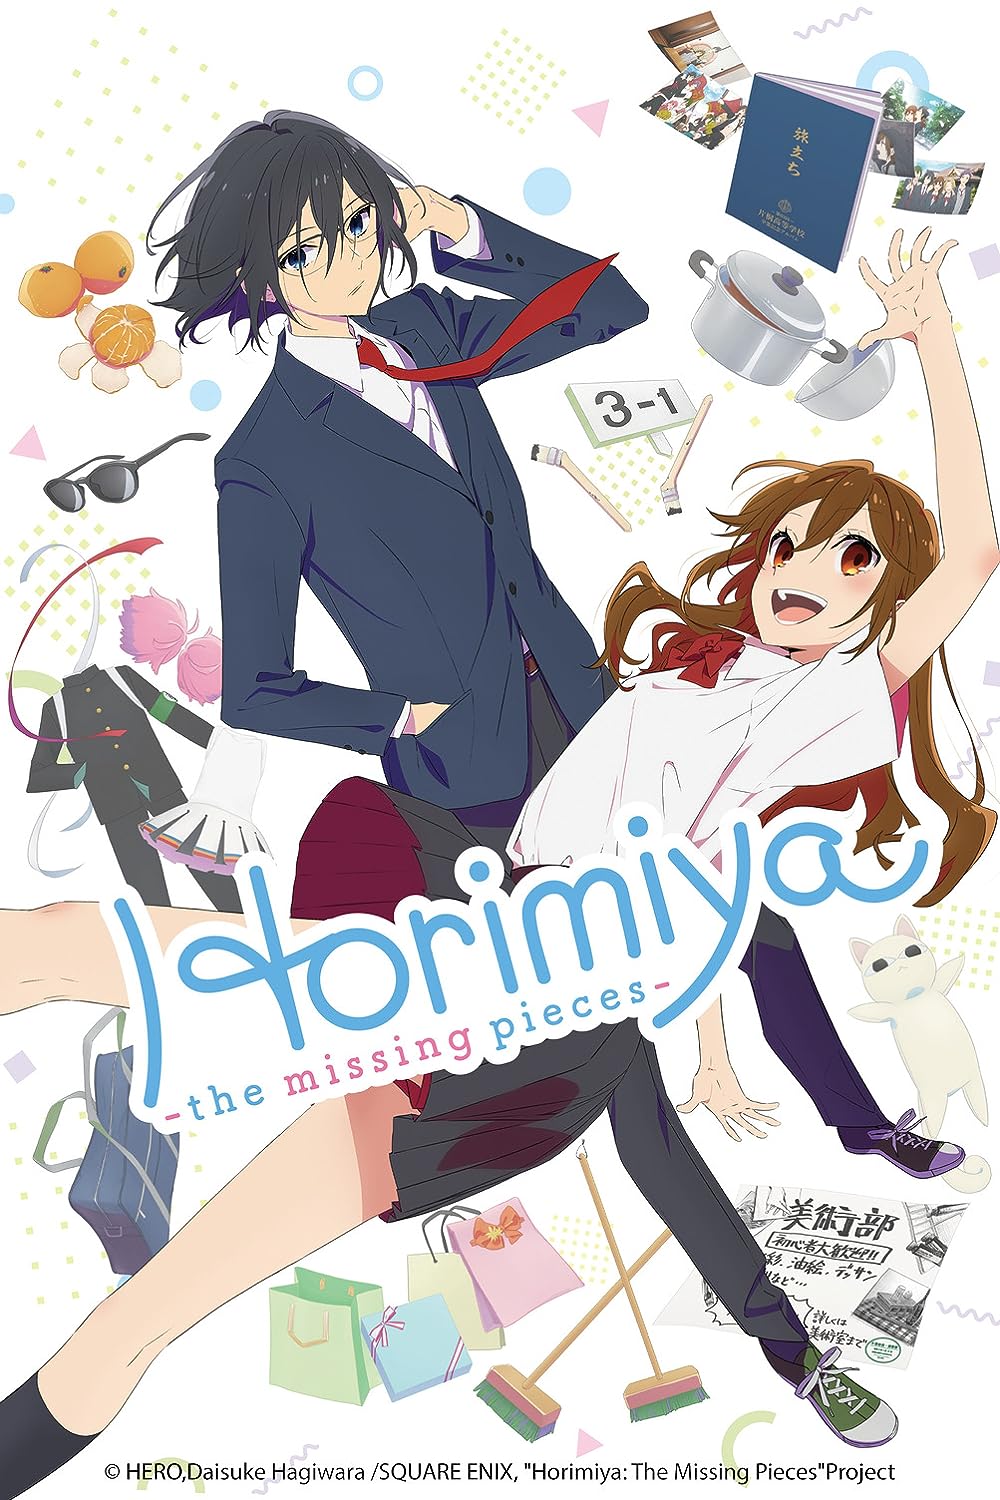 Horimiya' provides nostalgia for viewers – The Suffolk Journal